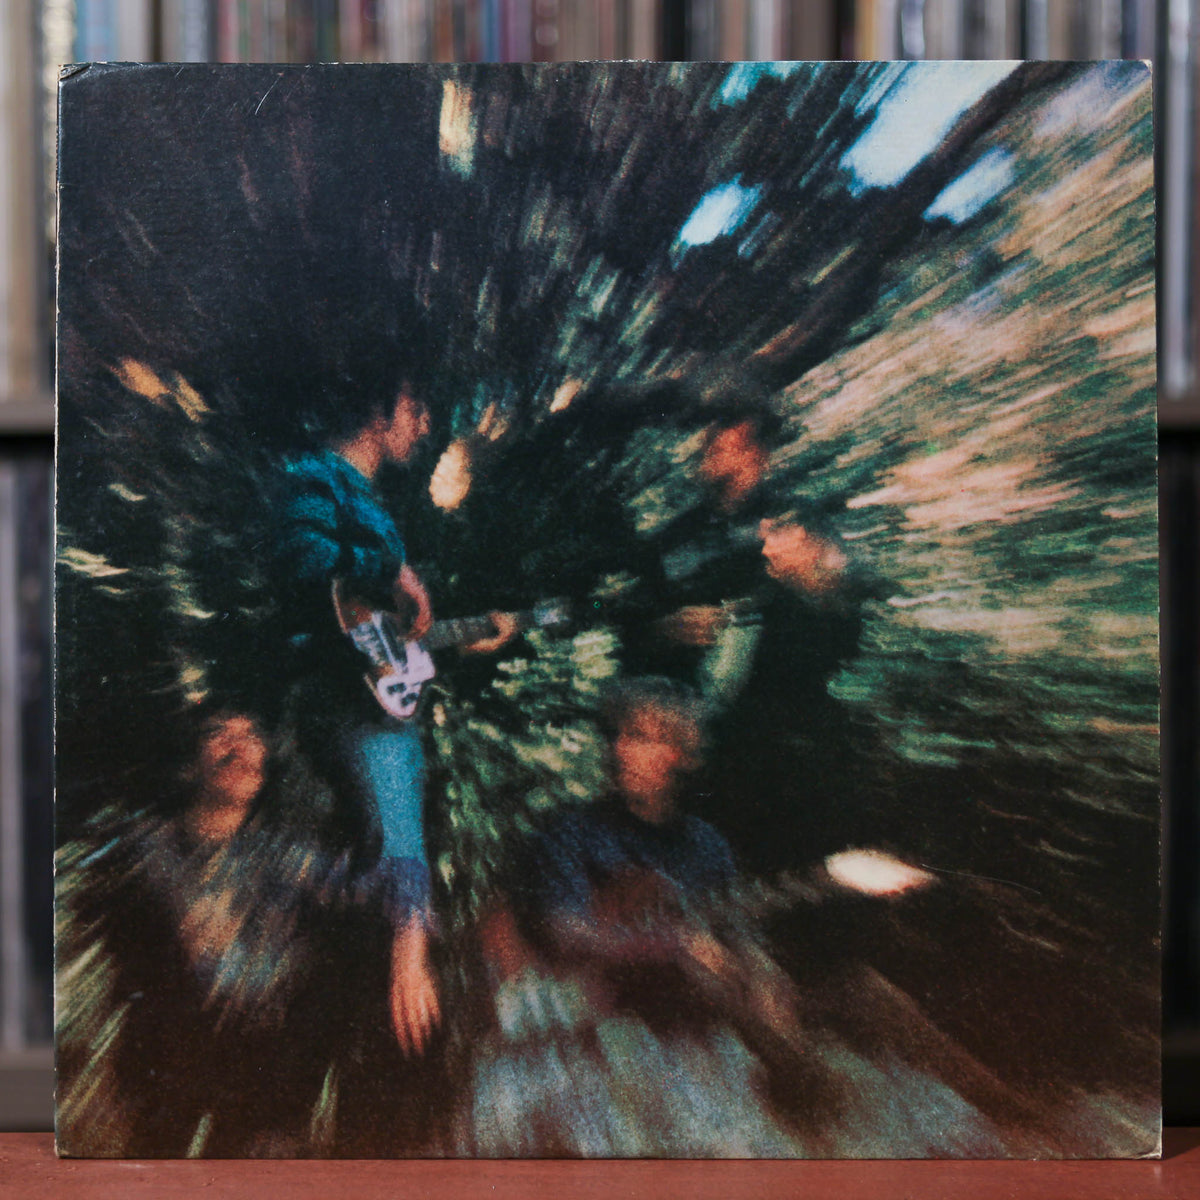 Creedence Clearwater Revival – Bayou Country (1969, Reel-To-Reel) - Discogs